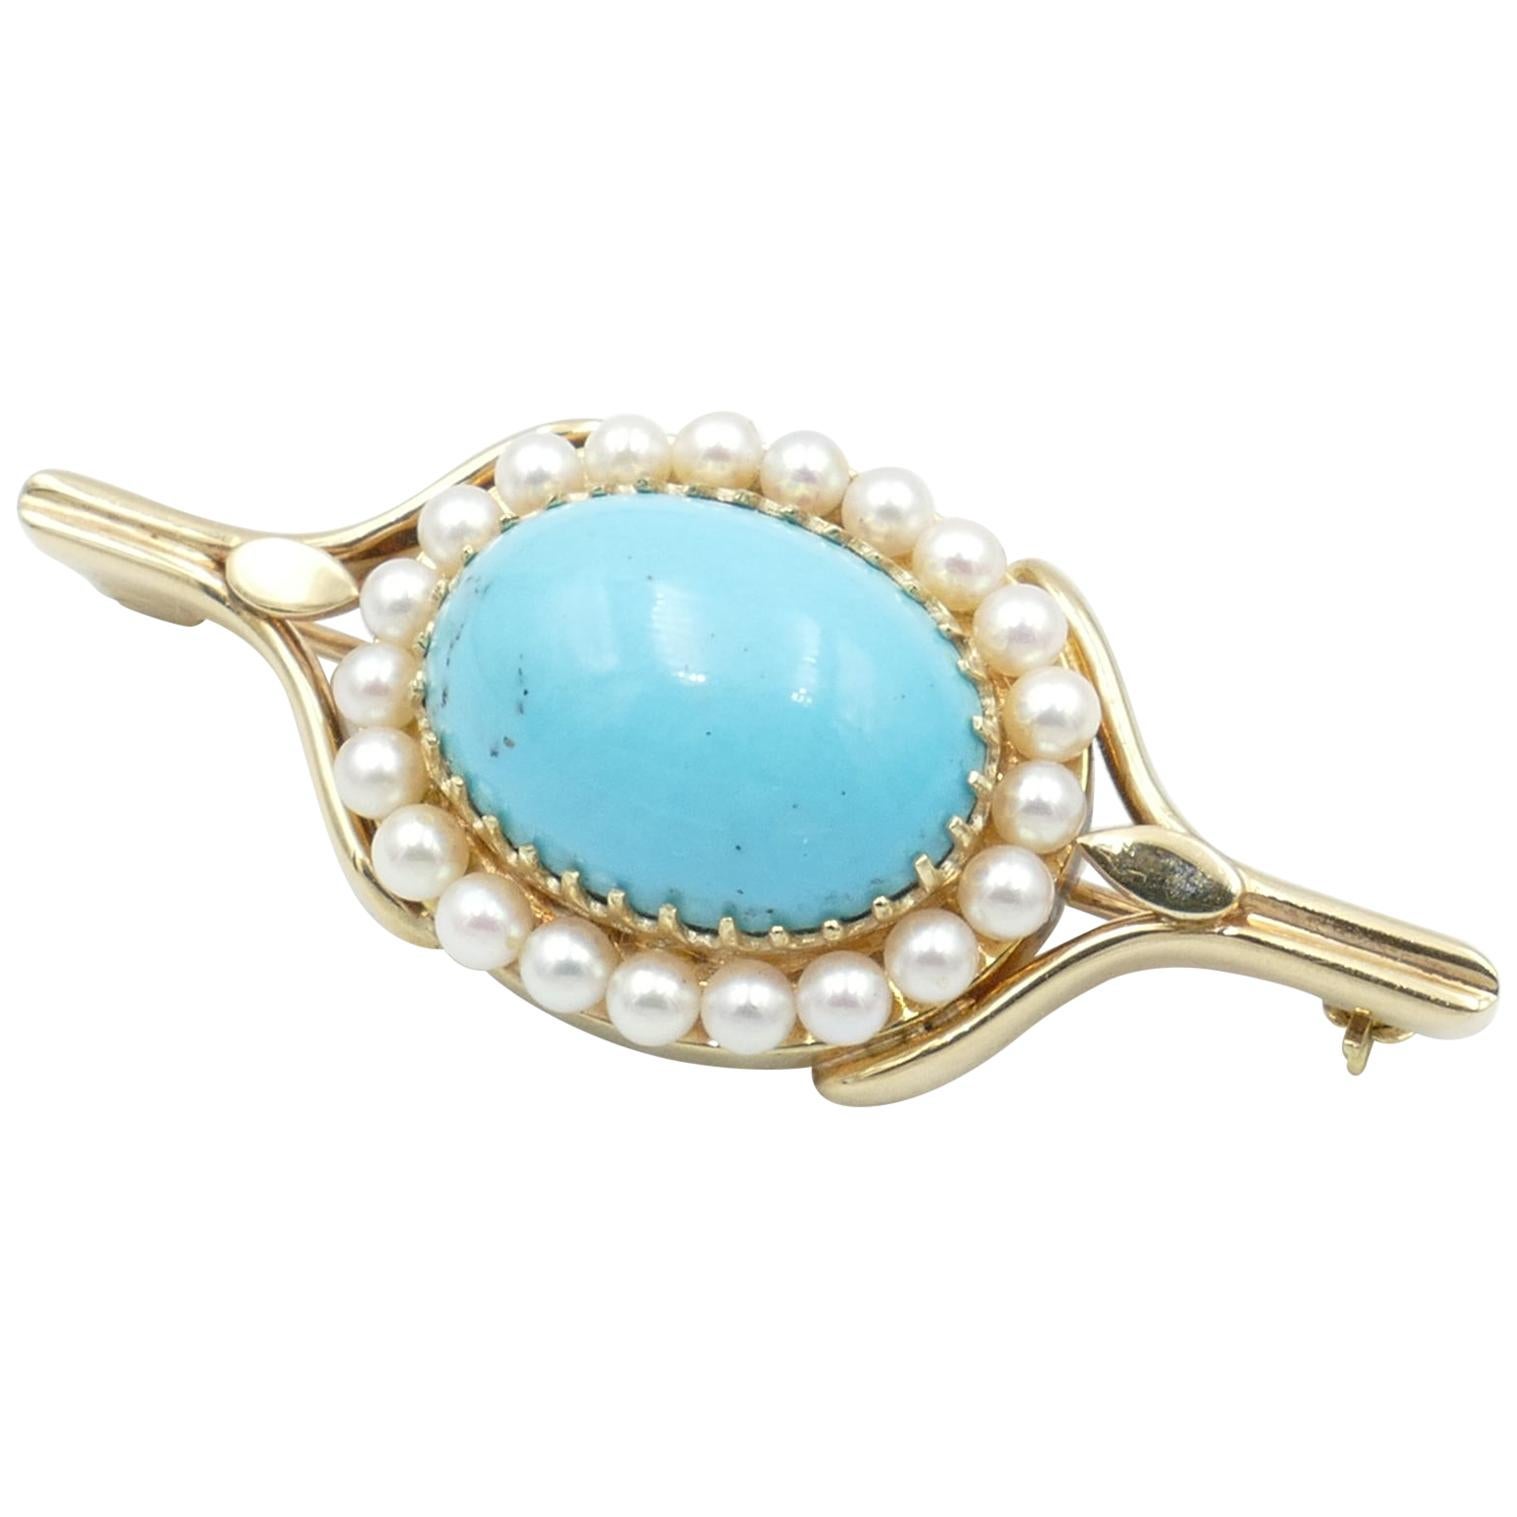 Antique 15.39 Carat Turquoise and Pearl 9 Carat Yellow Gold Brooch For Sale